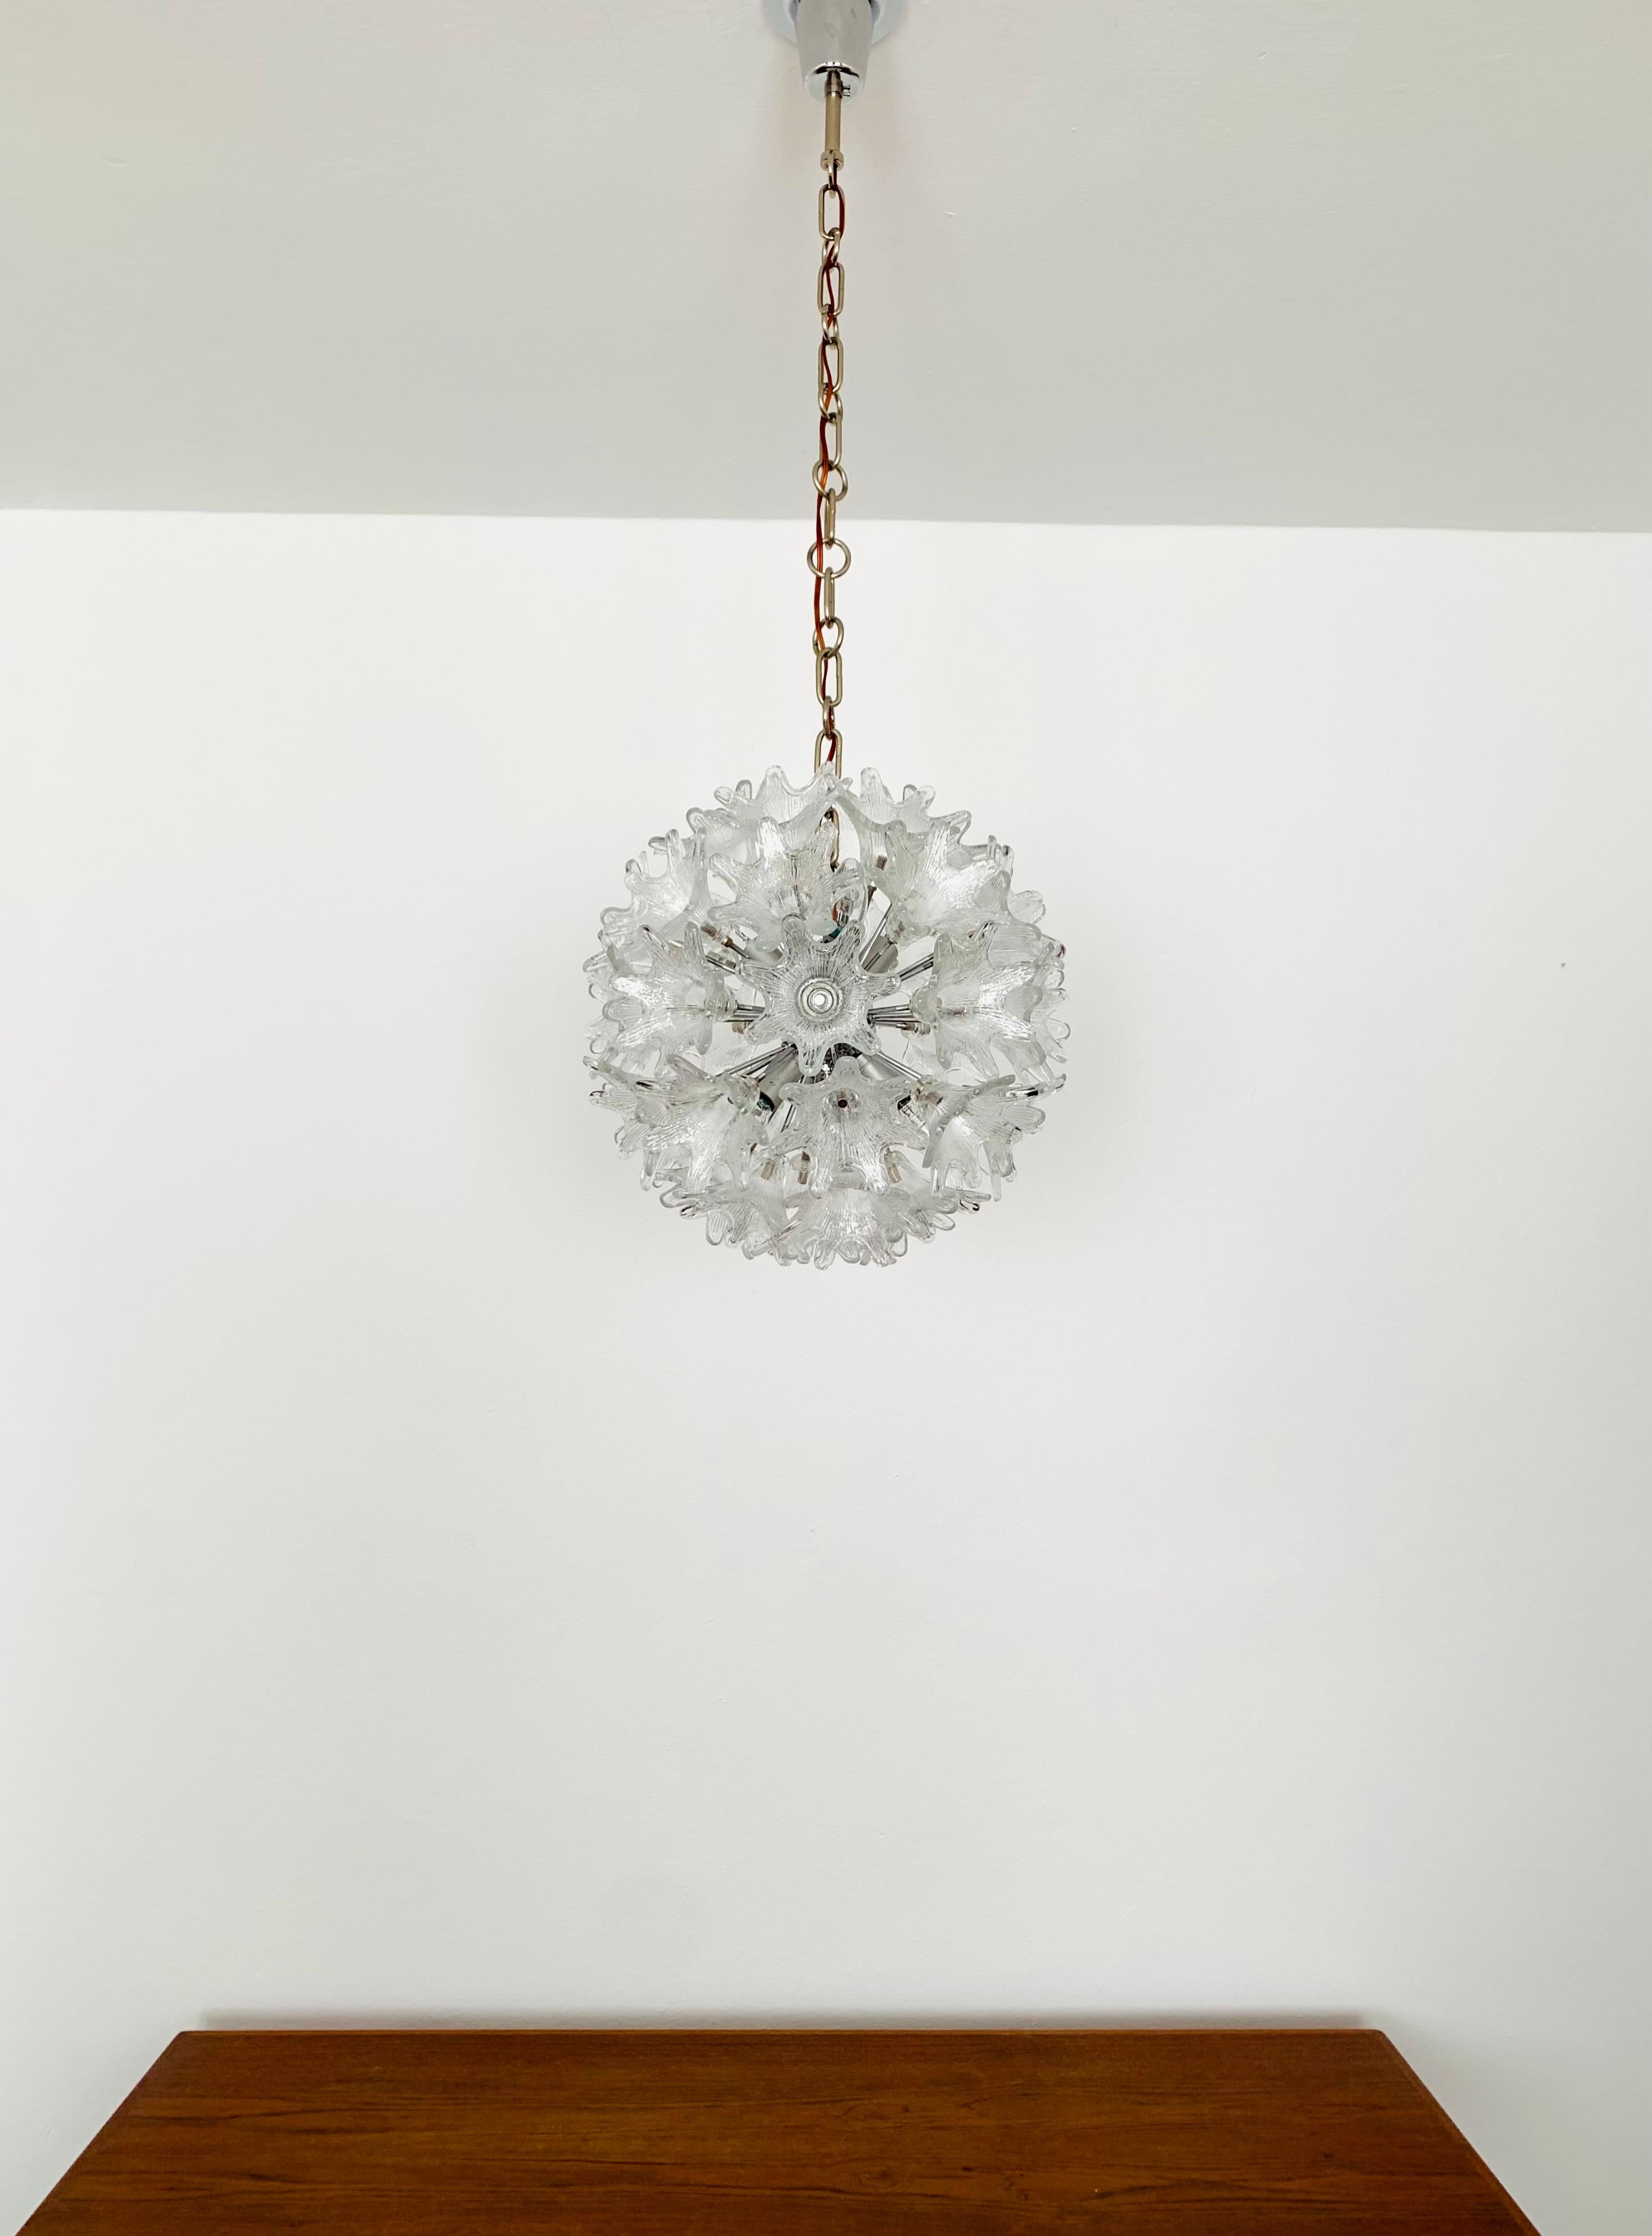 Mid-20th Century Italian Murano Glass Chandelier by Paolo Venini for VeArt For Sale